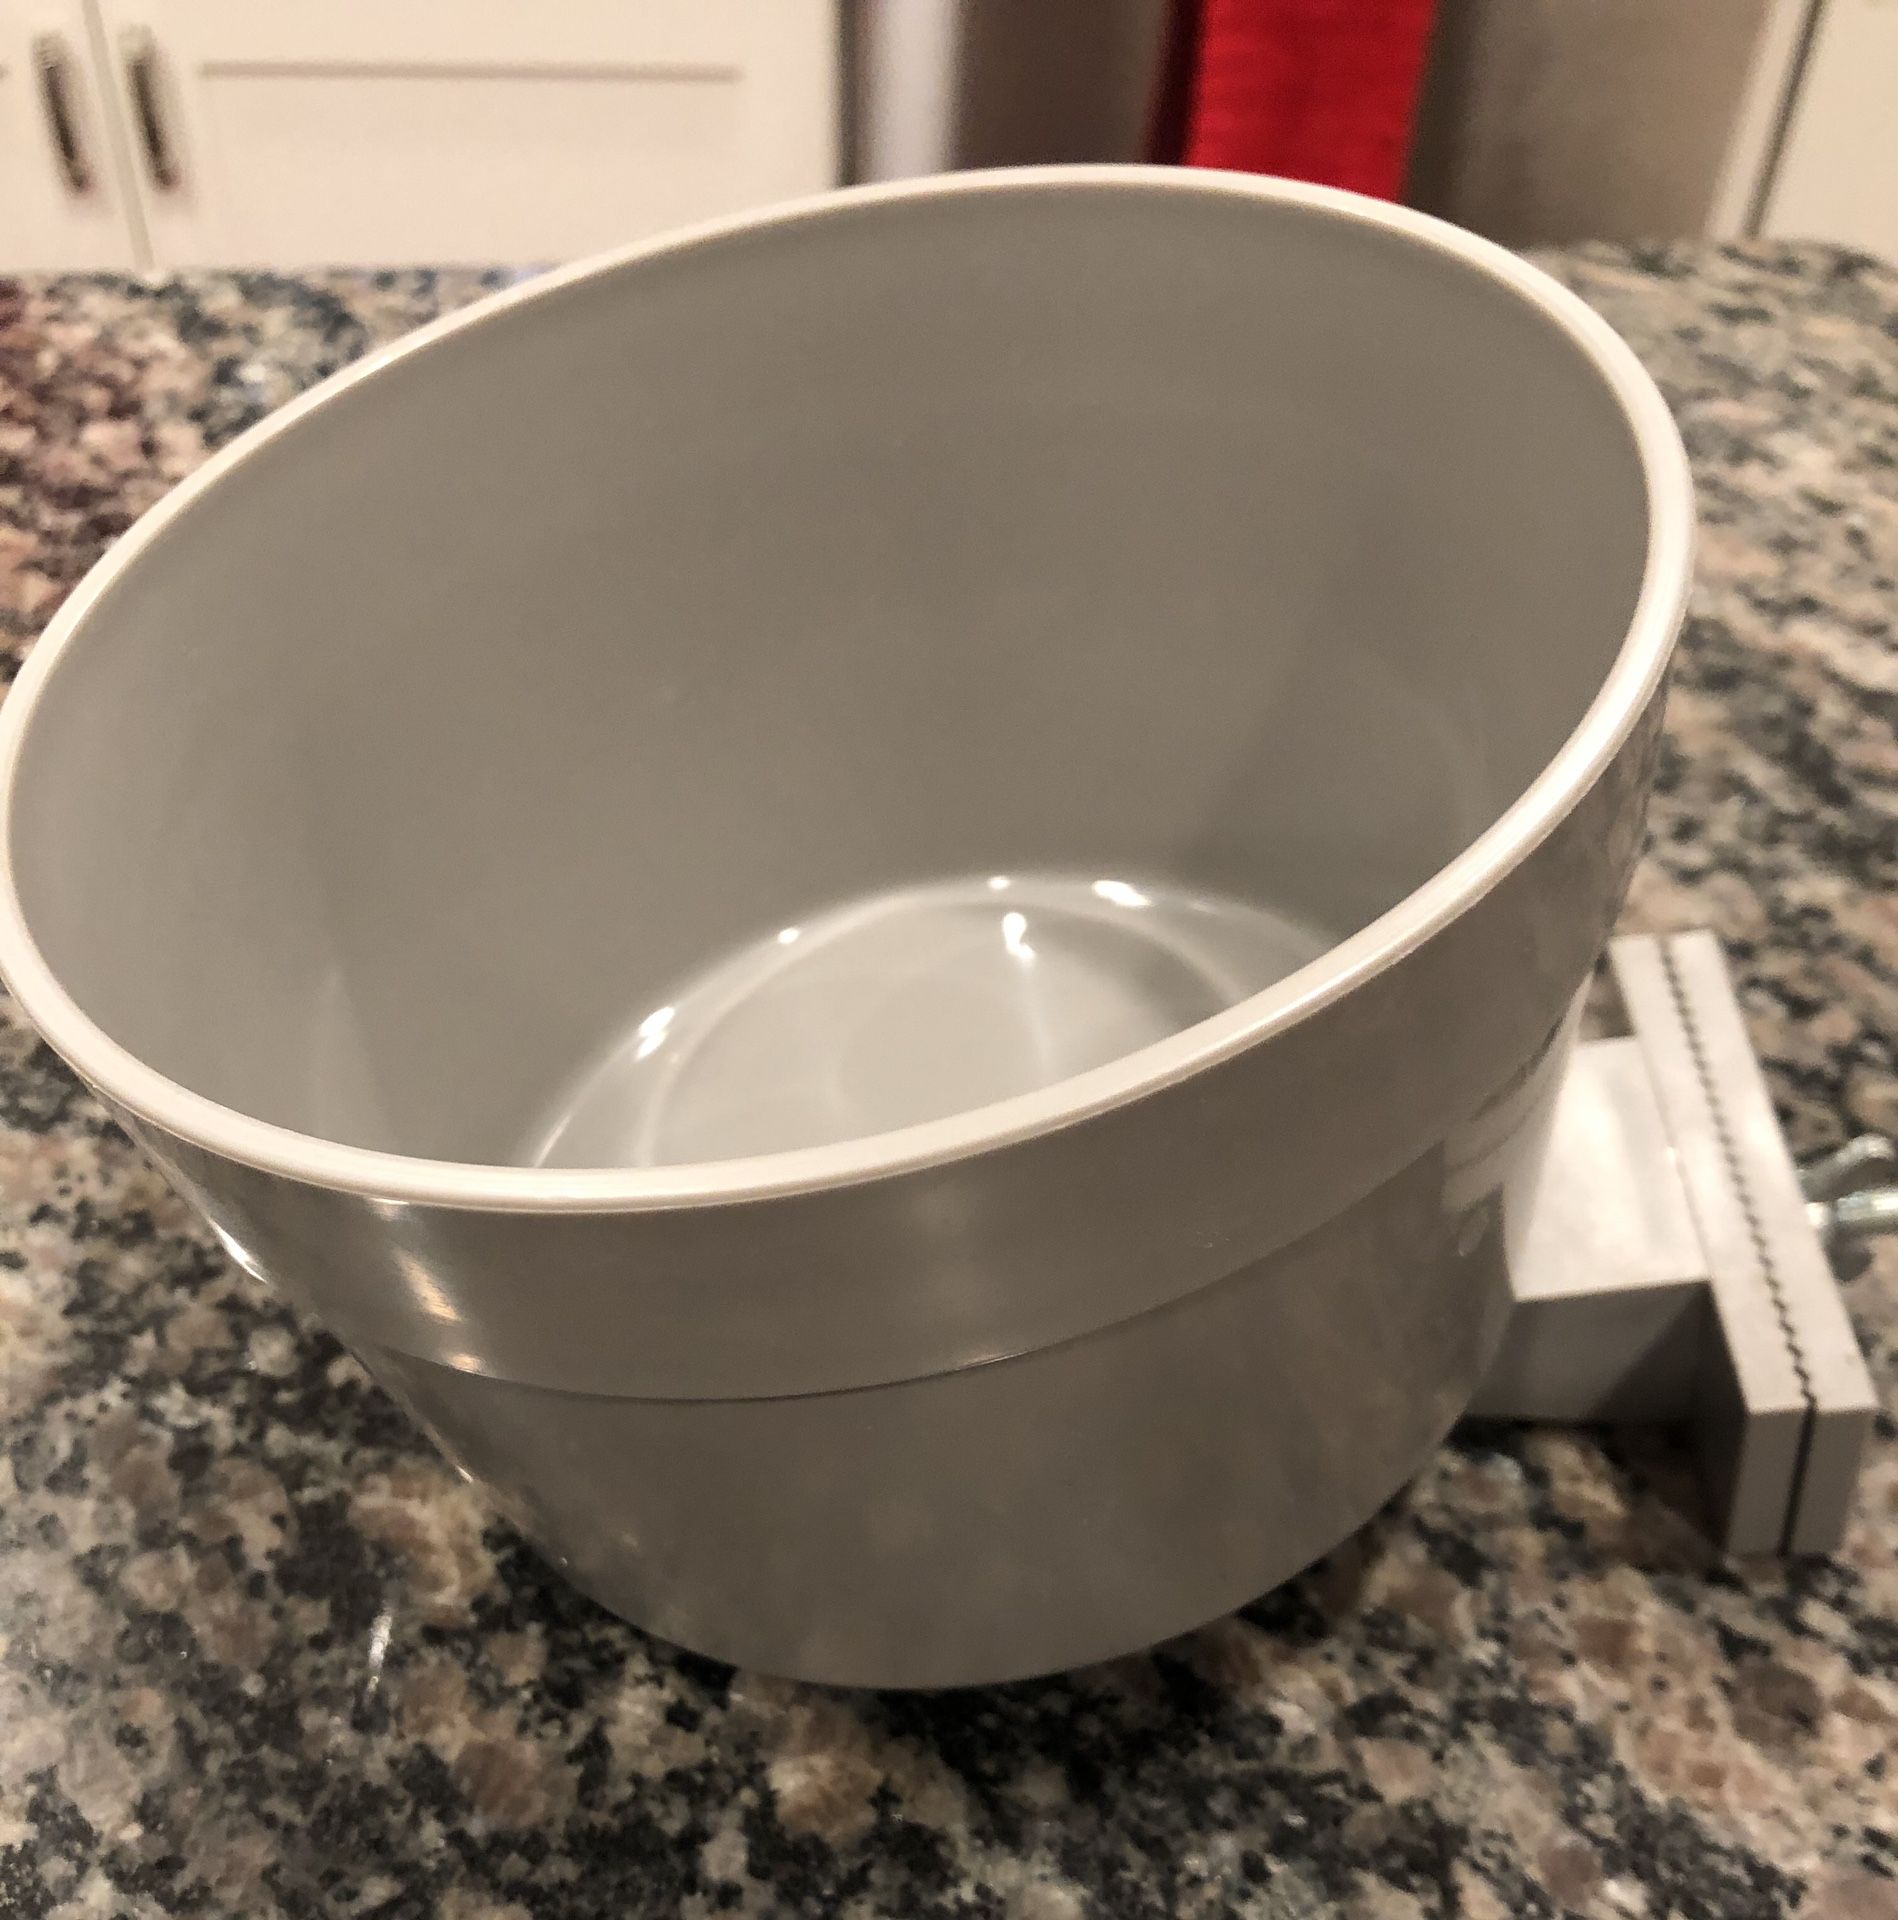 Dog crate attachable water bowl